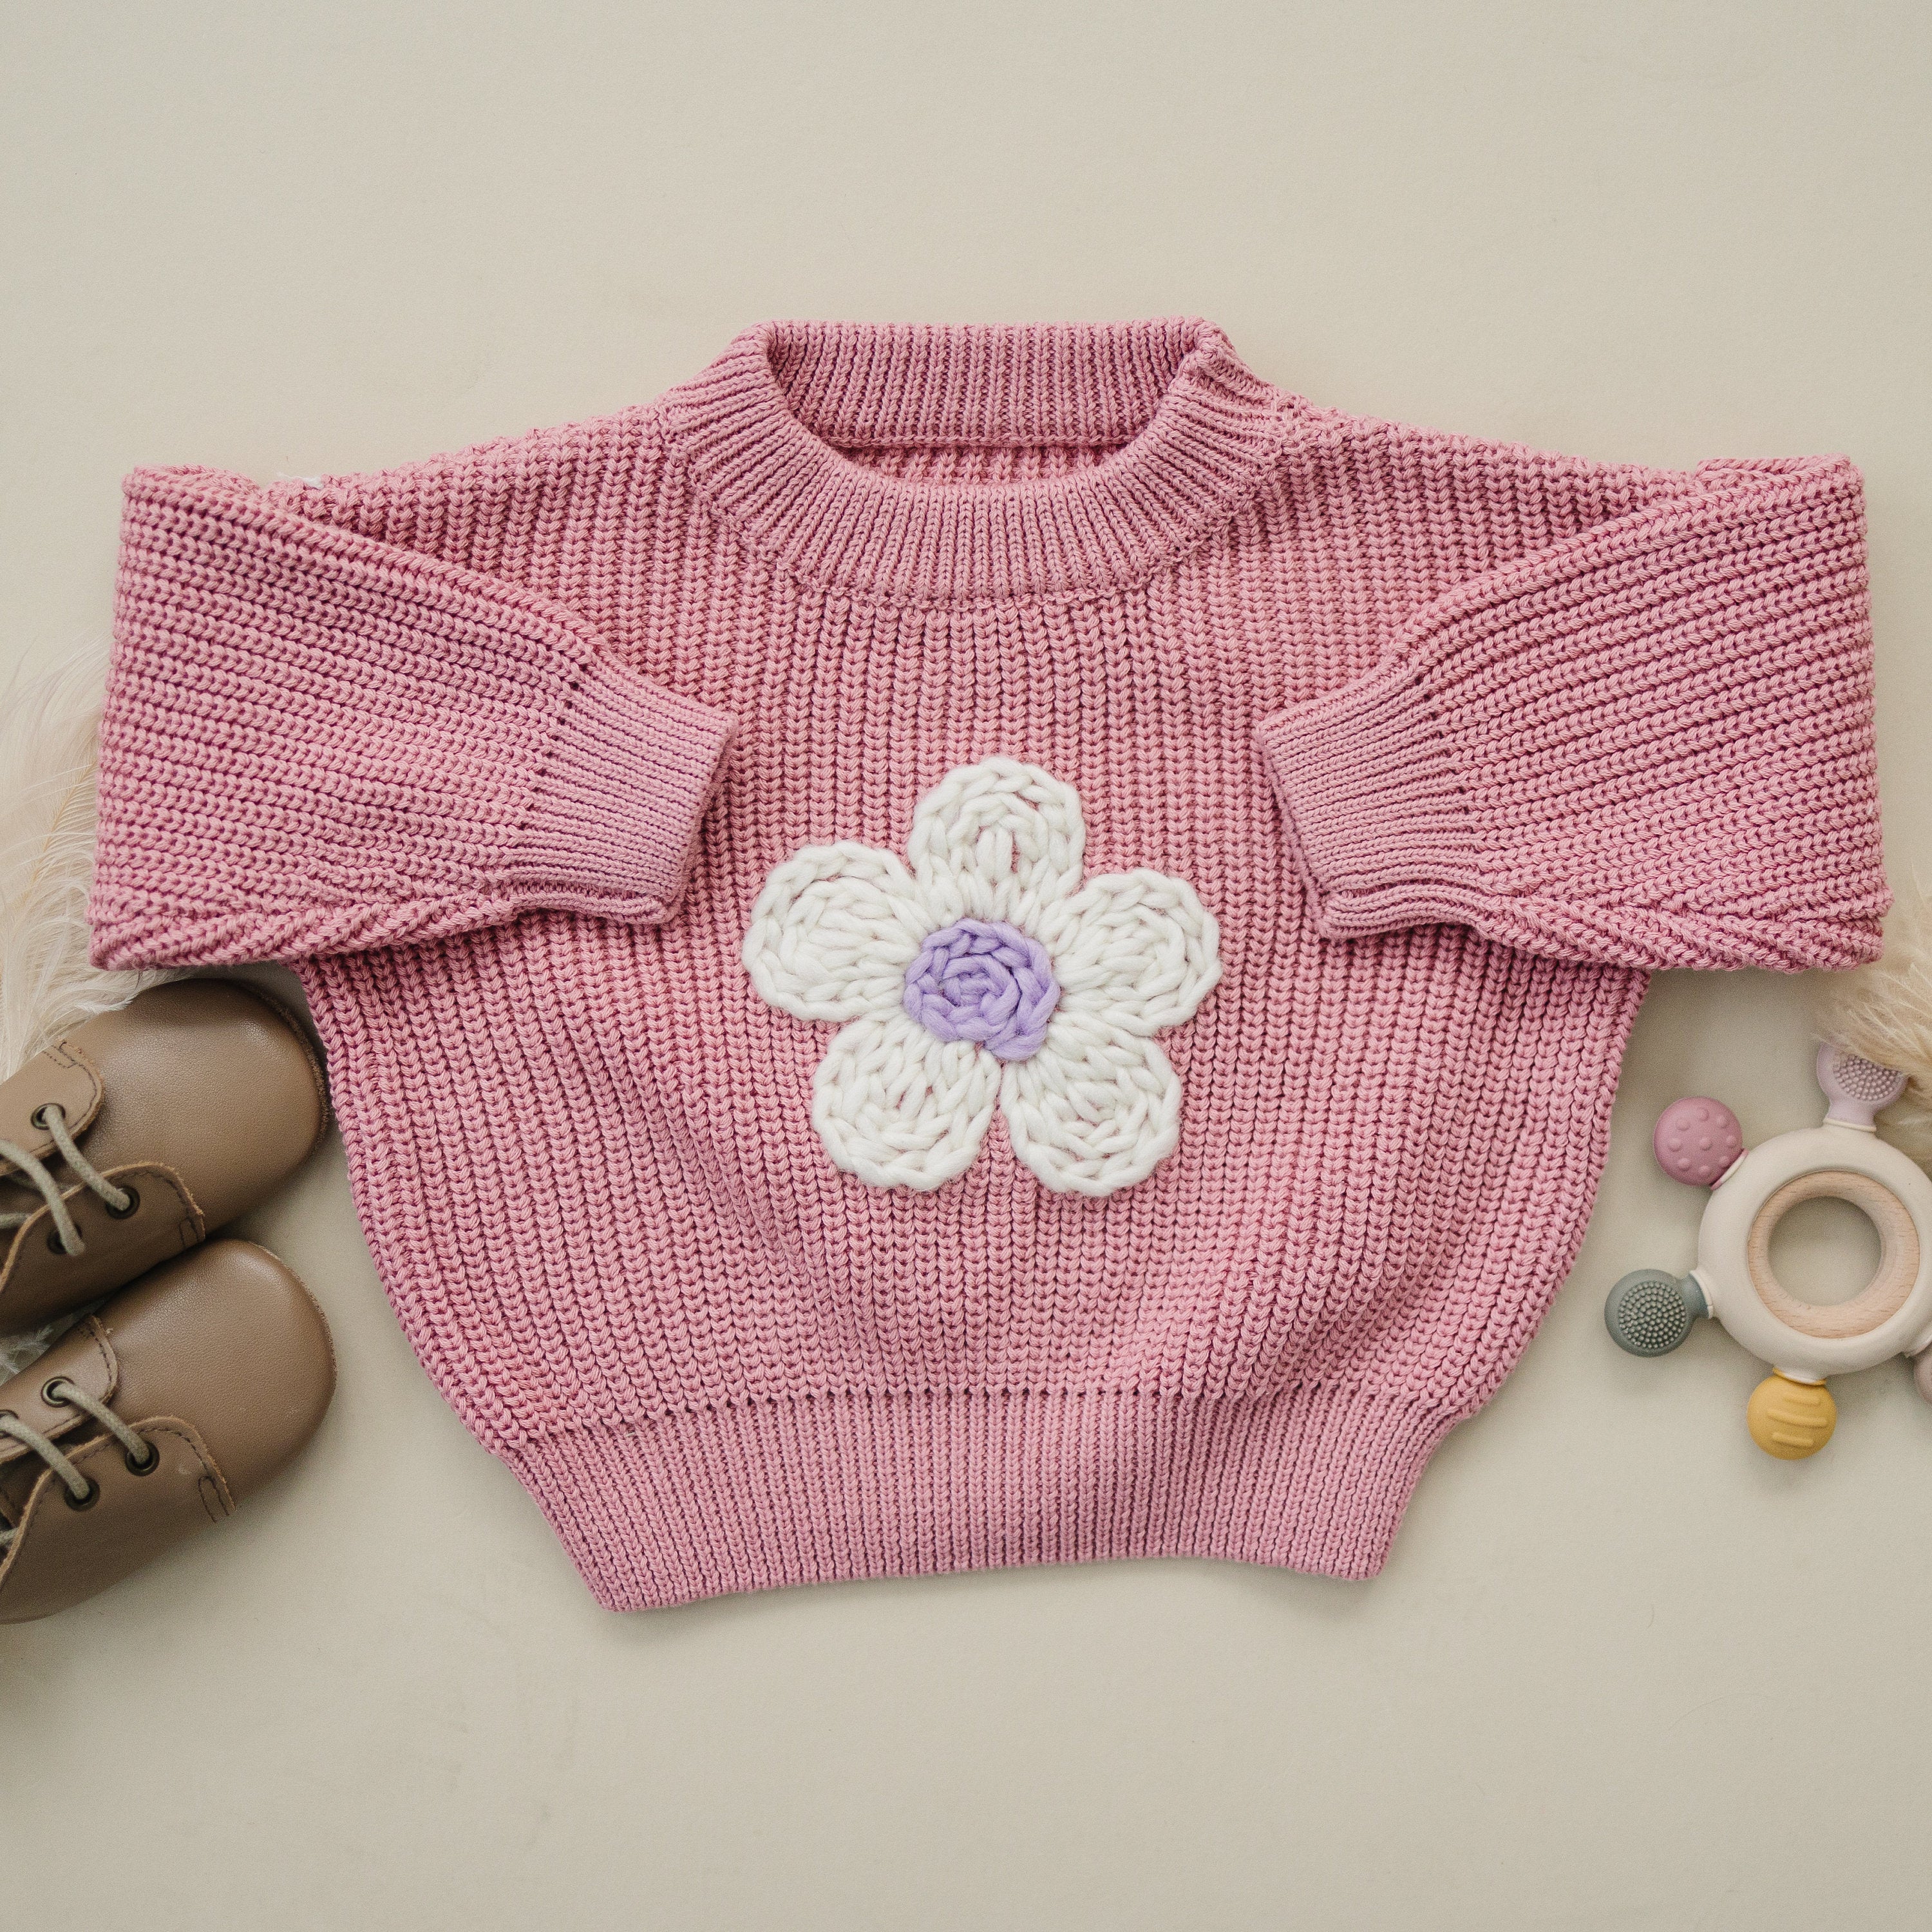 Pink Daisy Hand Embroidered Chunky Knit Sweater for Babies & Toddlers - Flower Embroidered Baby Sweater - Baby Girl Toddler Floral Top